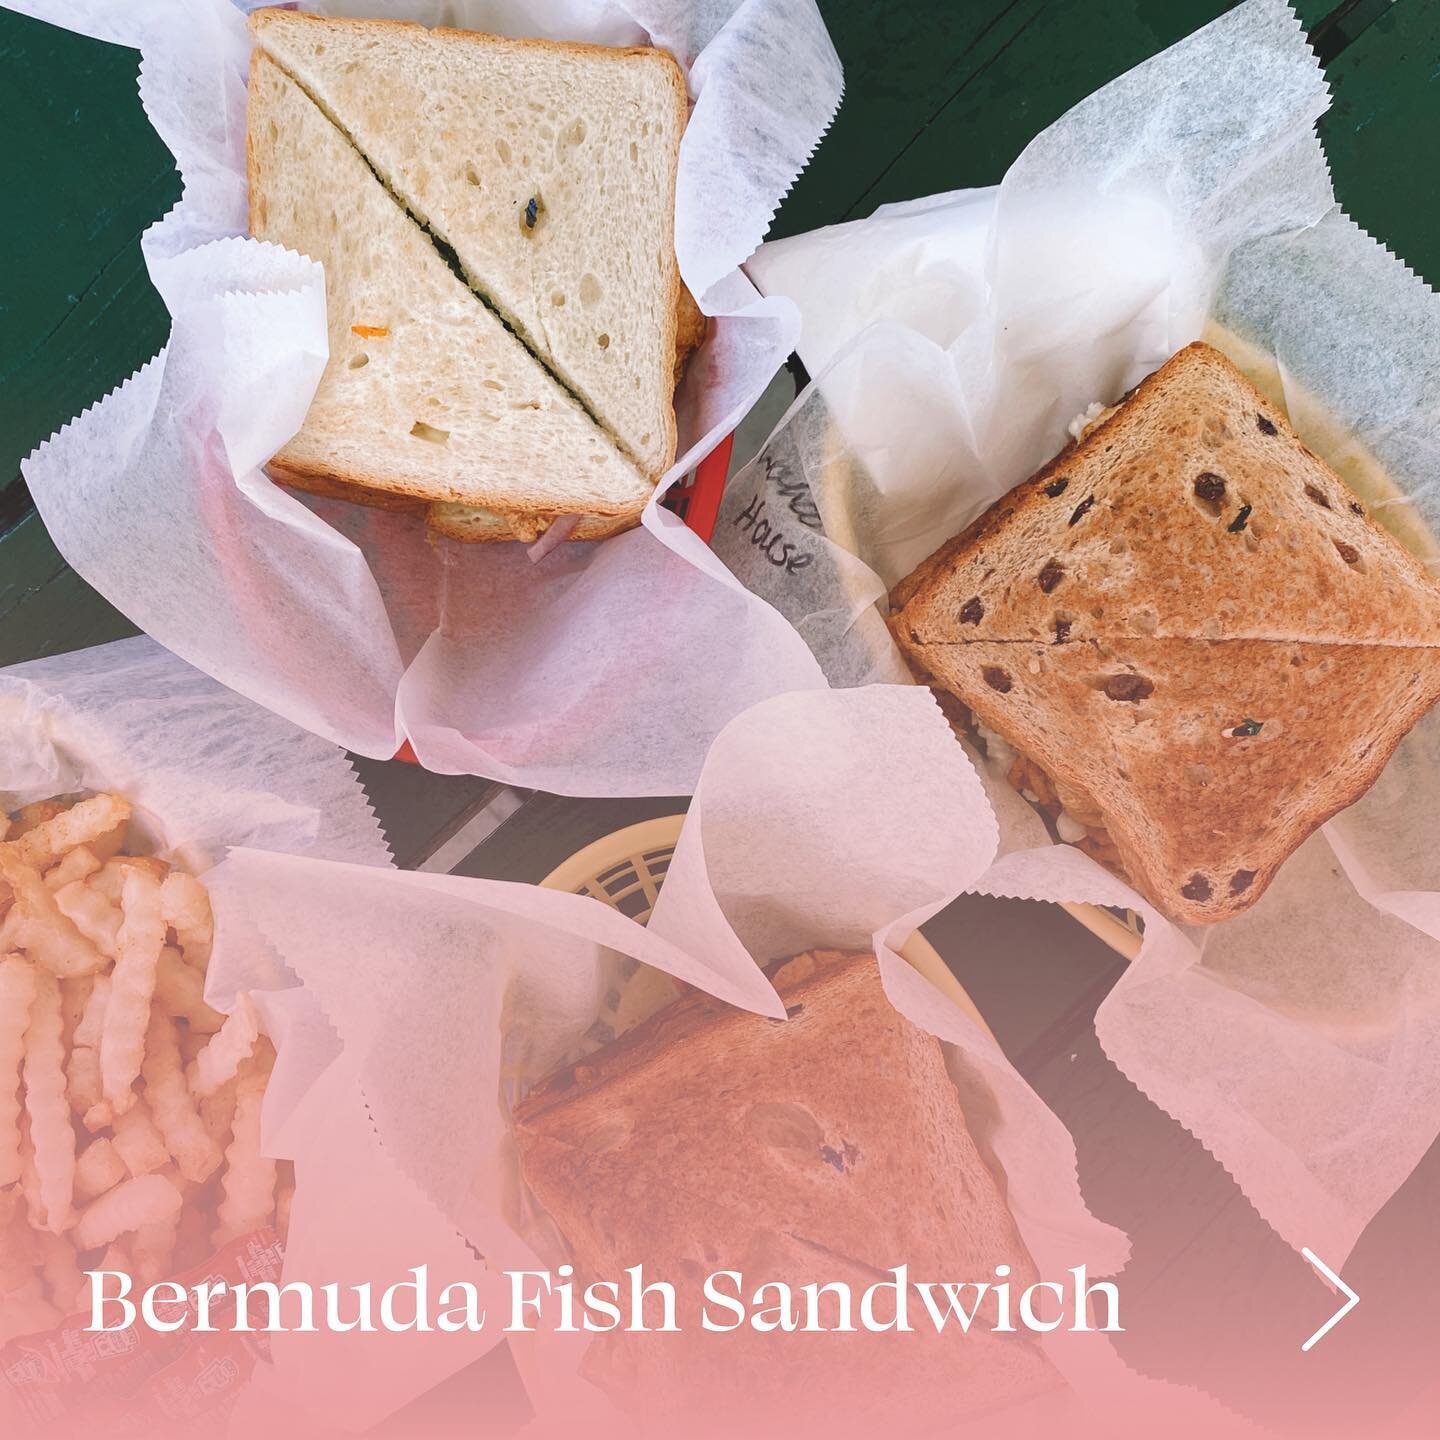 &ldquo;fish pon bun&rdquo;
Arguably, Bermuda&rsquo;s most iconic culinary staple. The fish sandwich has caused many debates over the appropriate condiments, the best purveyors, the ideal fish - you name it.

The unassuming kitchens are usually the ha